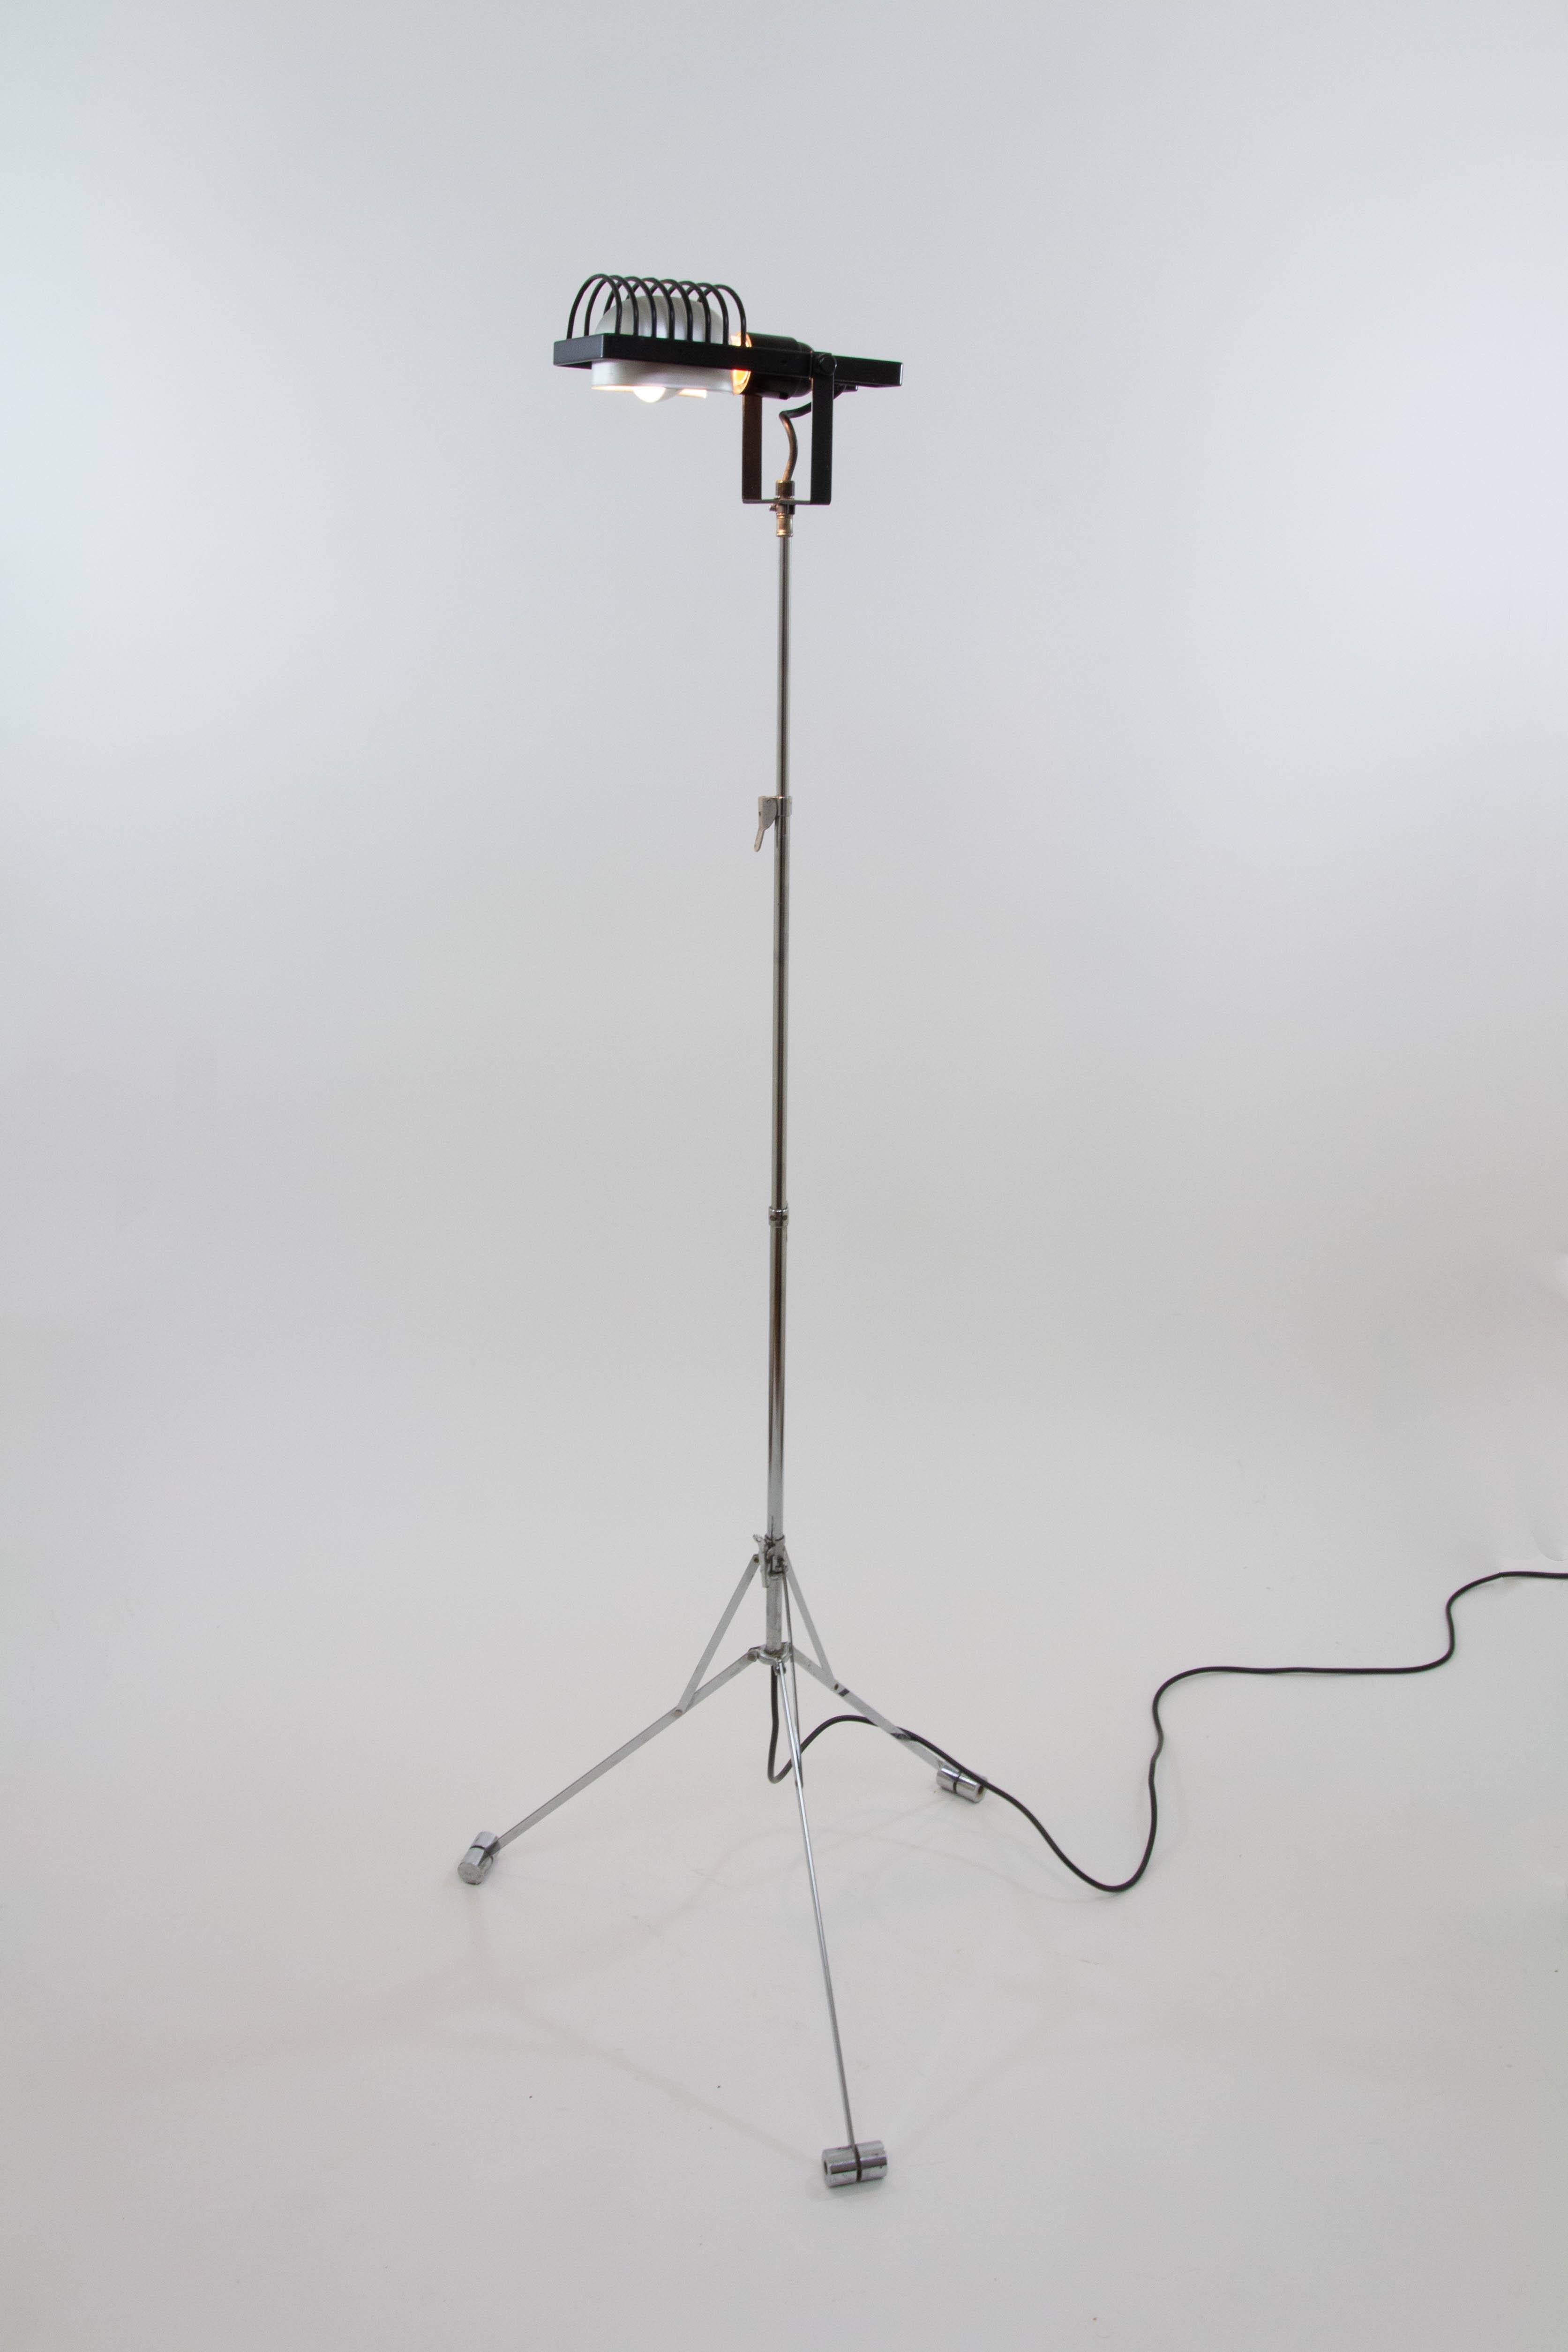 Sintesi floor lamp designed by Ernesto Gismondi for Italian lighting company Artemide in 1975.

Like all models within the Sintesi series this floor lamp is flexible. The aluminium shade is completely directional. You can adjust the height of the